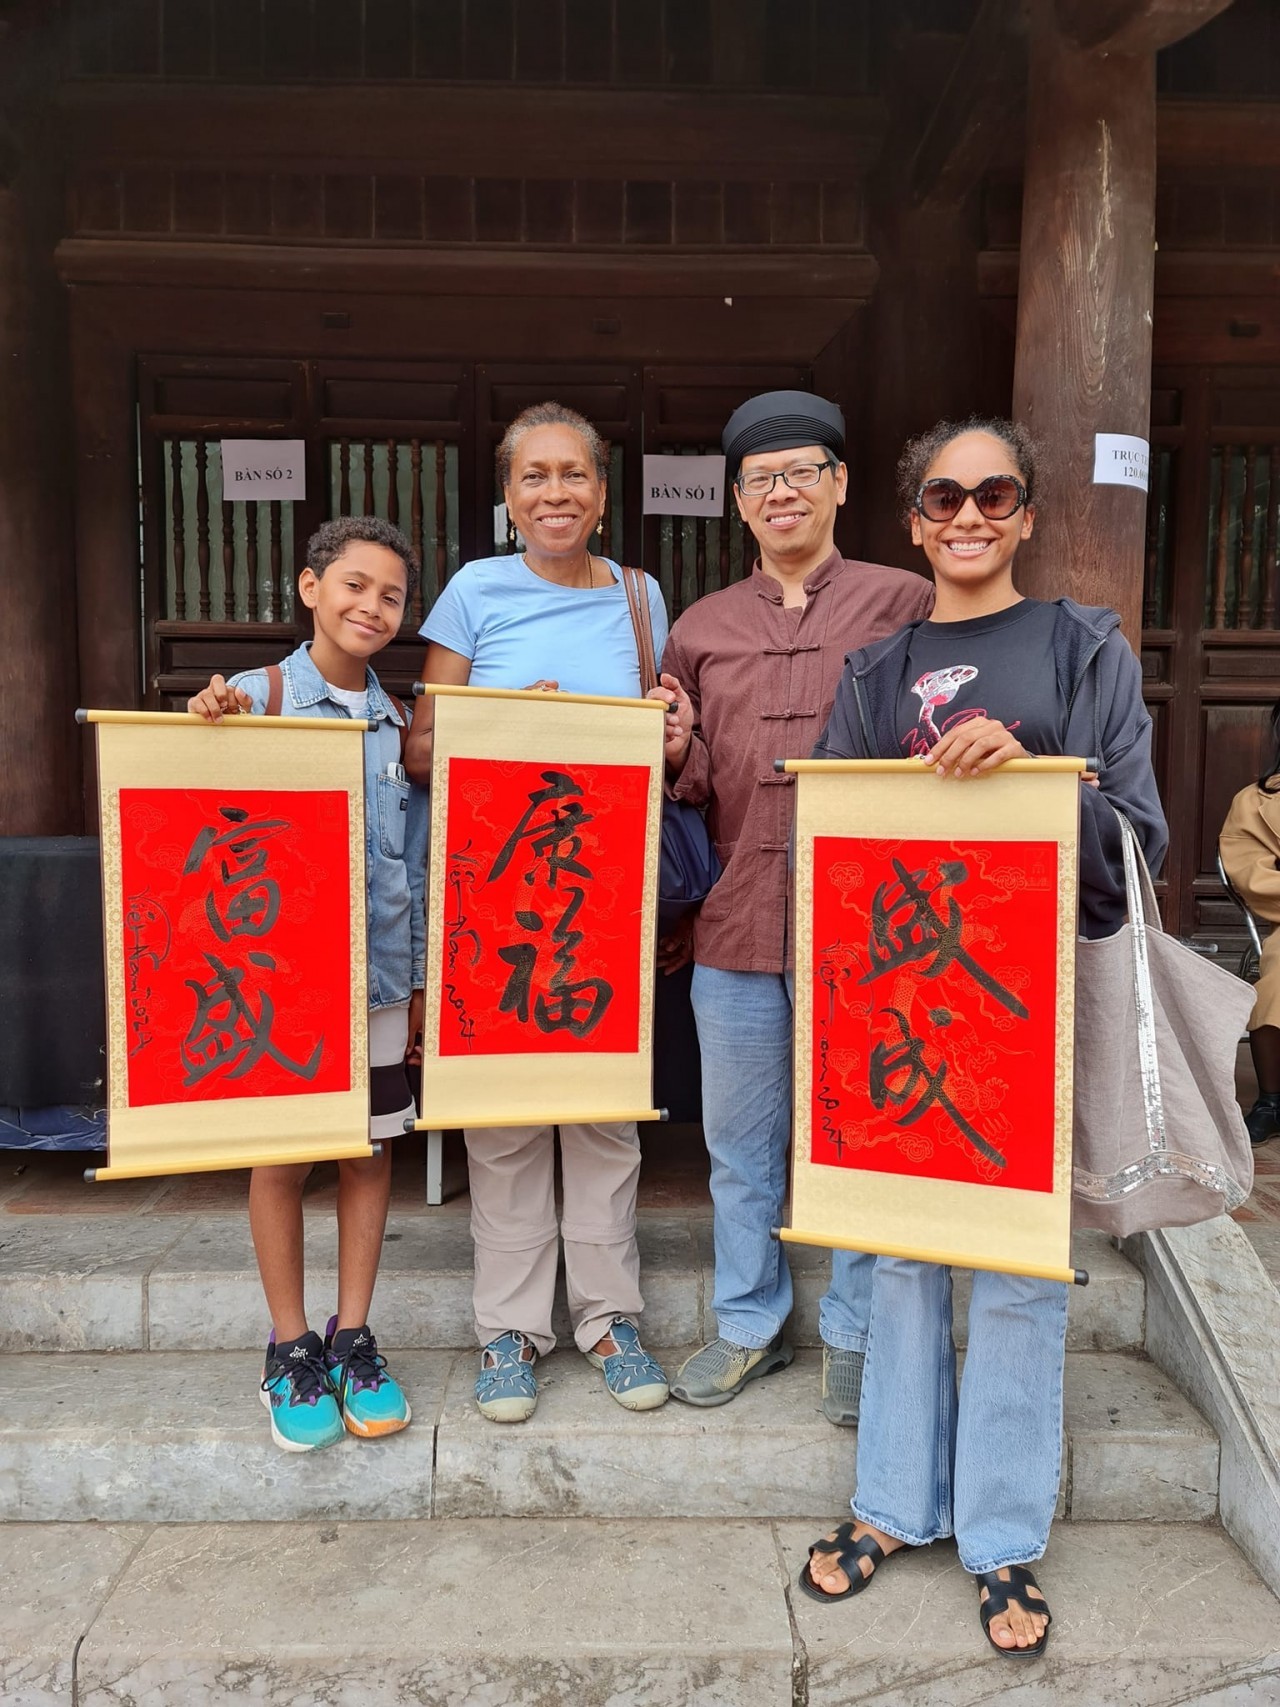 International Tourists Ask for Calligraphic Works at Temple of Literature